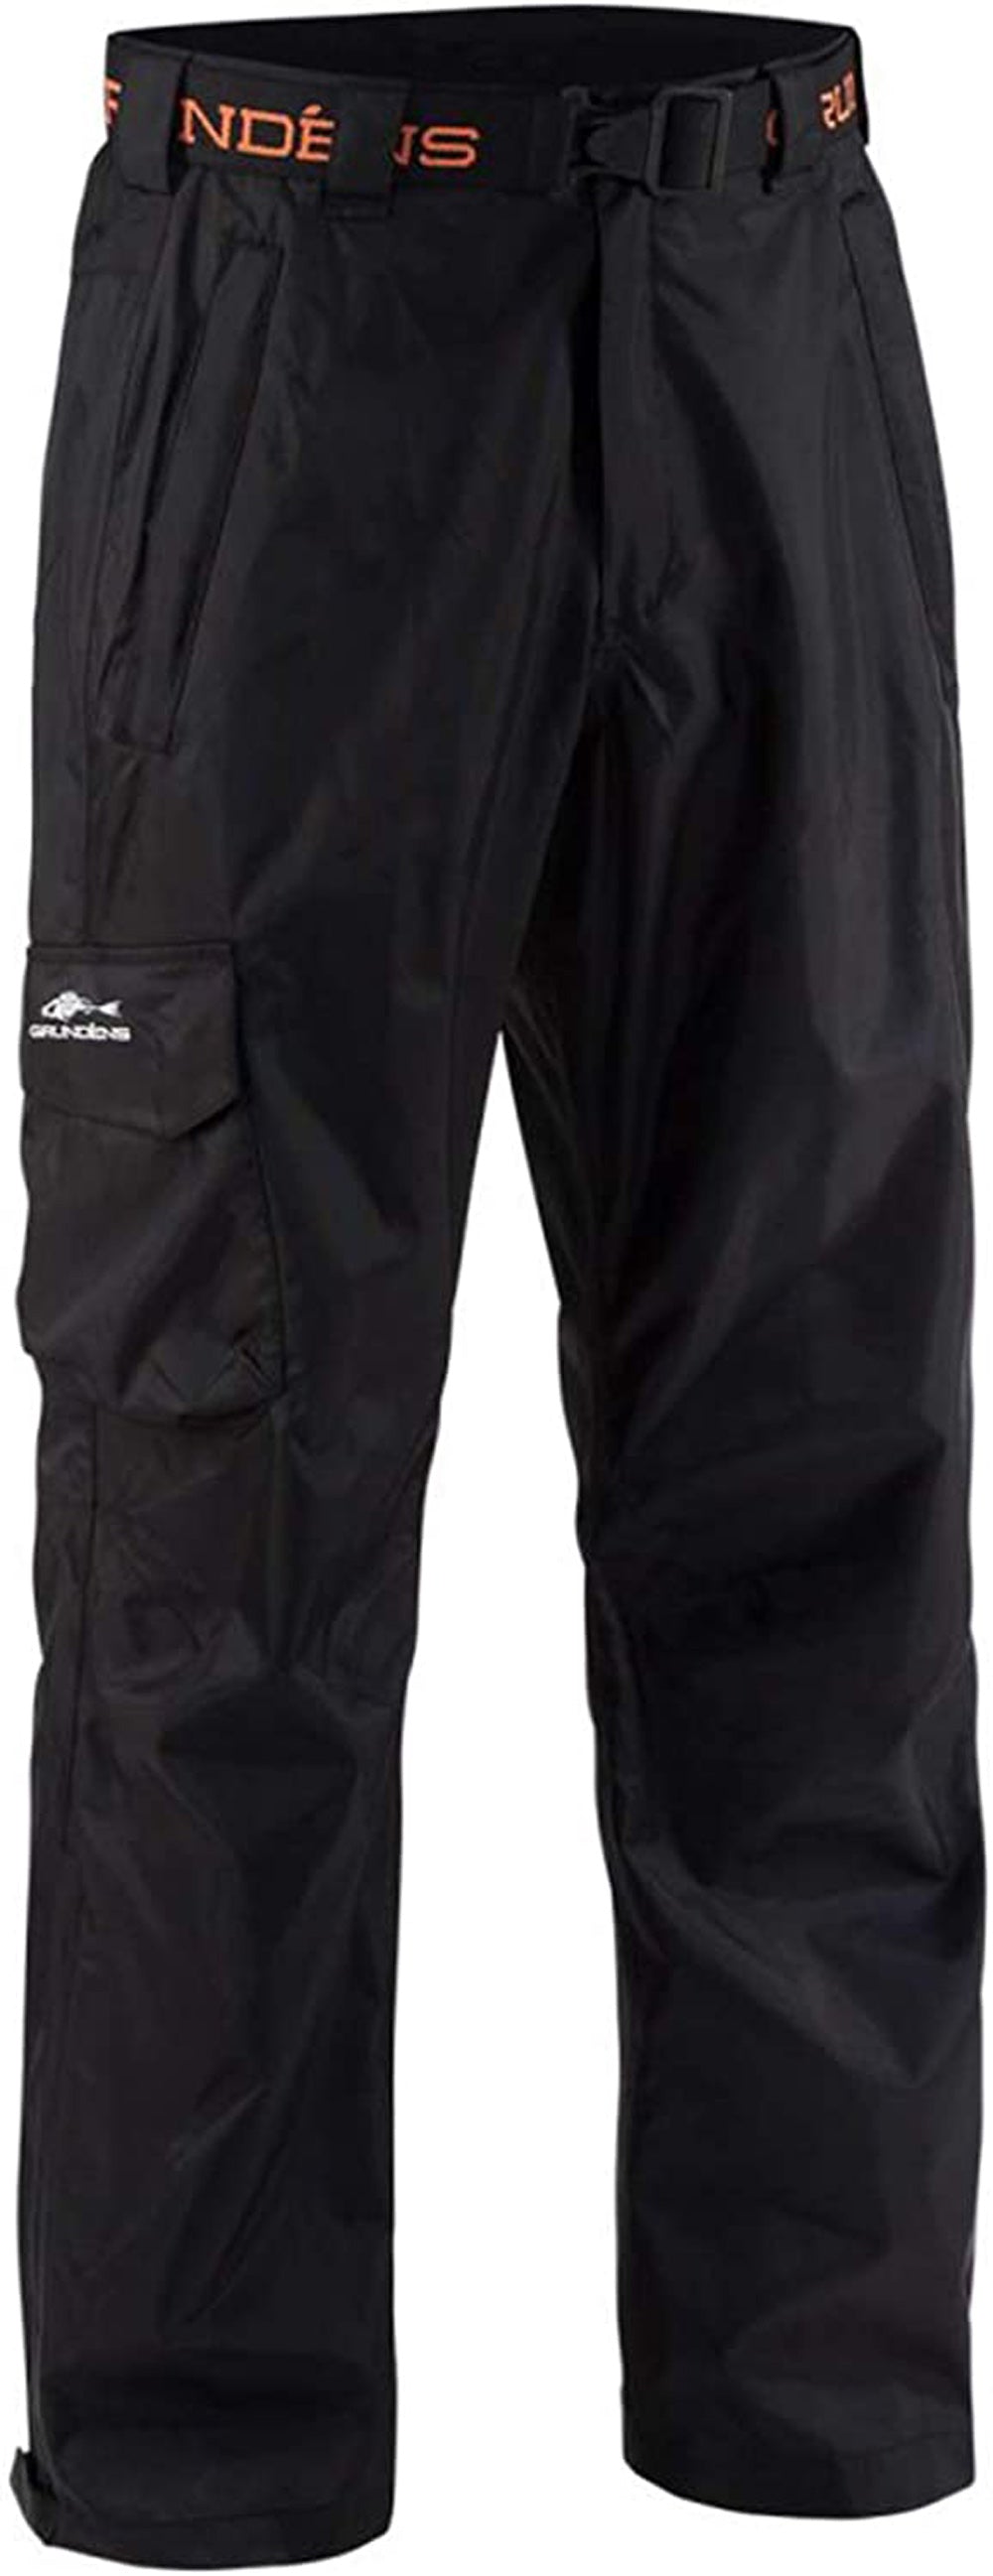 Weather Watch Pant in Black color